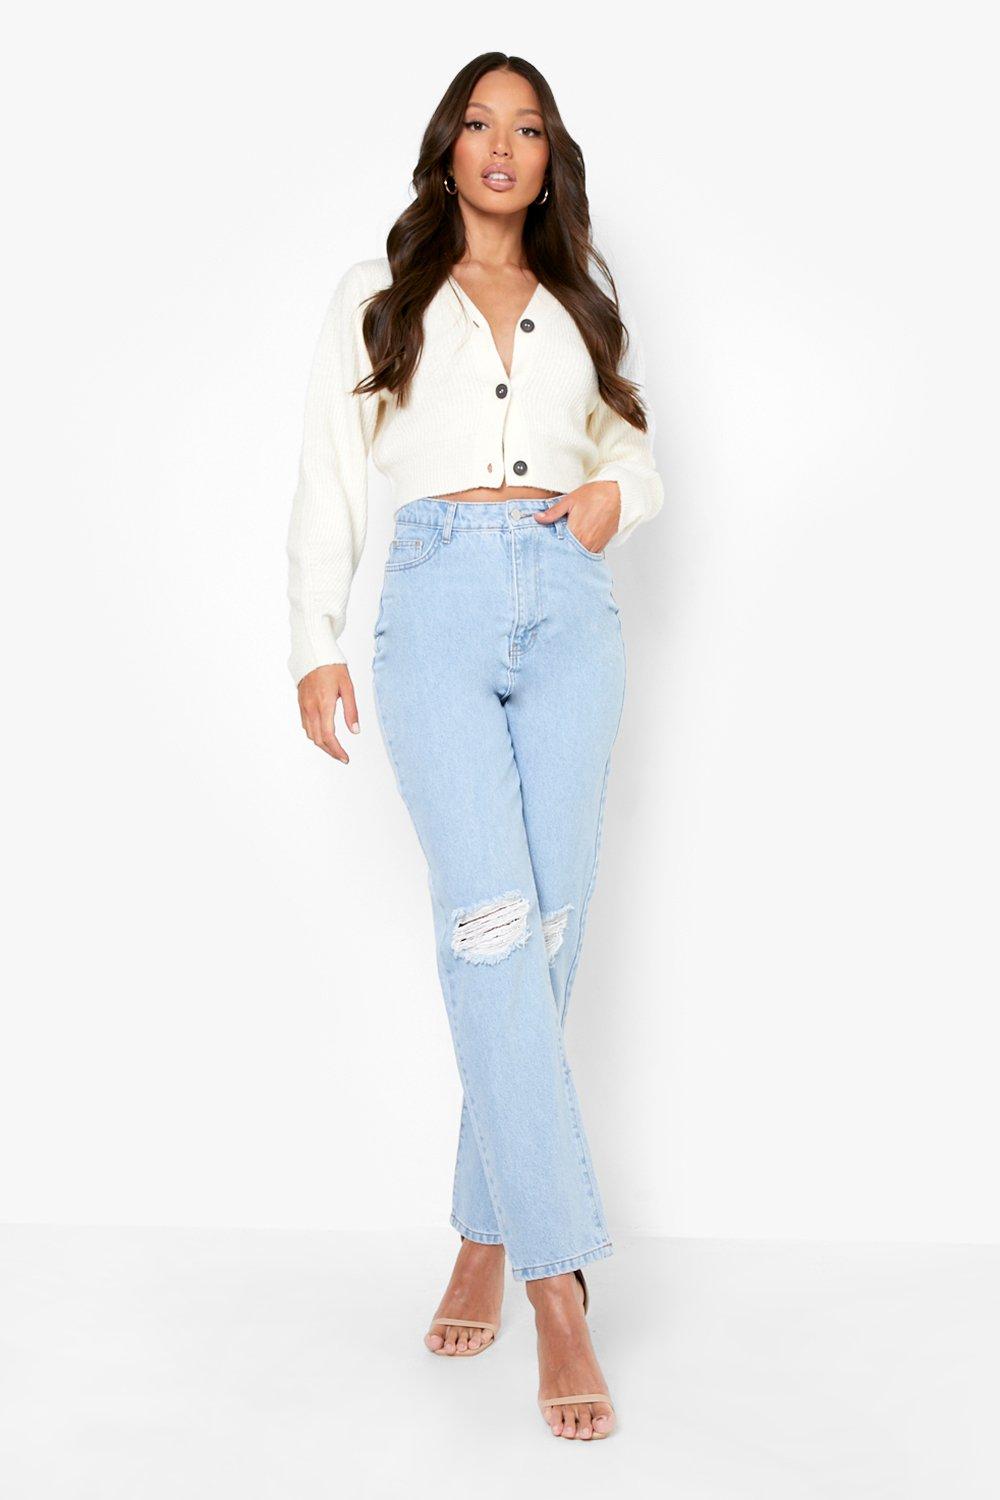 Blue Boohoo Denim Two Tone Colour Block Straight Jeans in Light Wash Womens Jeans Boohoo Jeans 